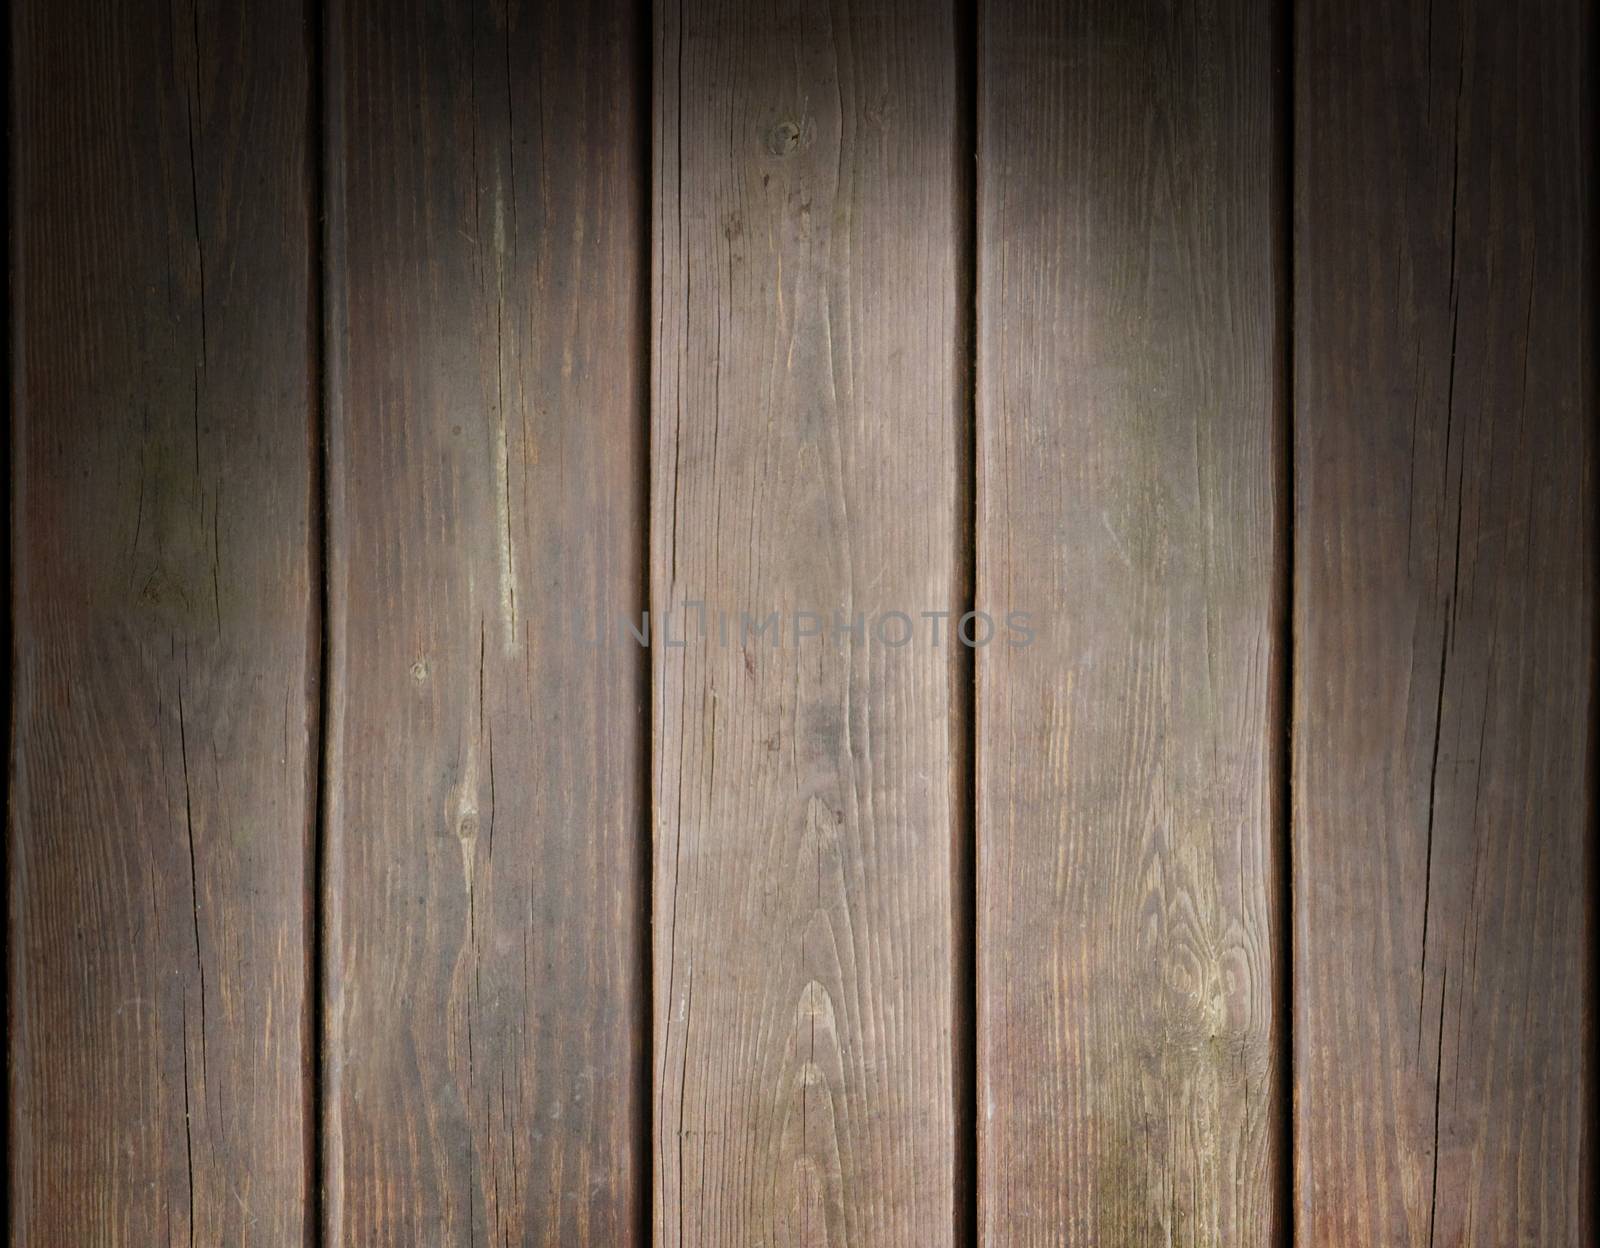 Weathered wooden plank background lit from above by Balefire9